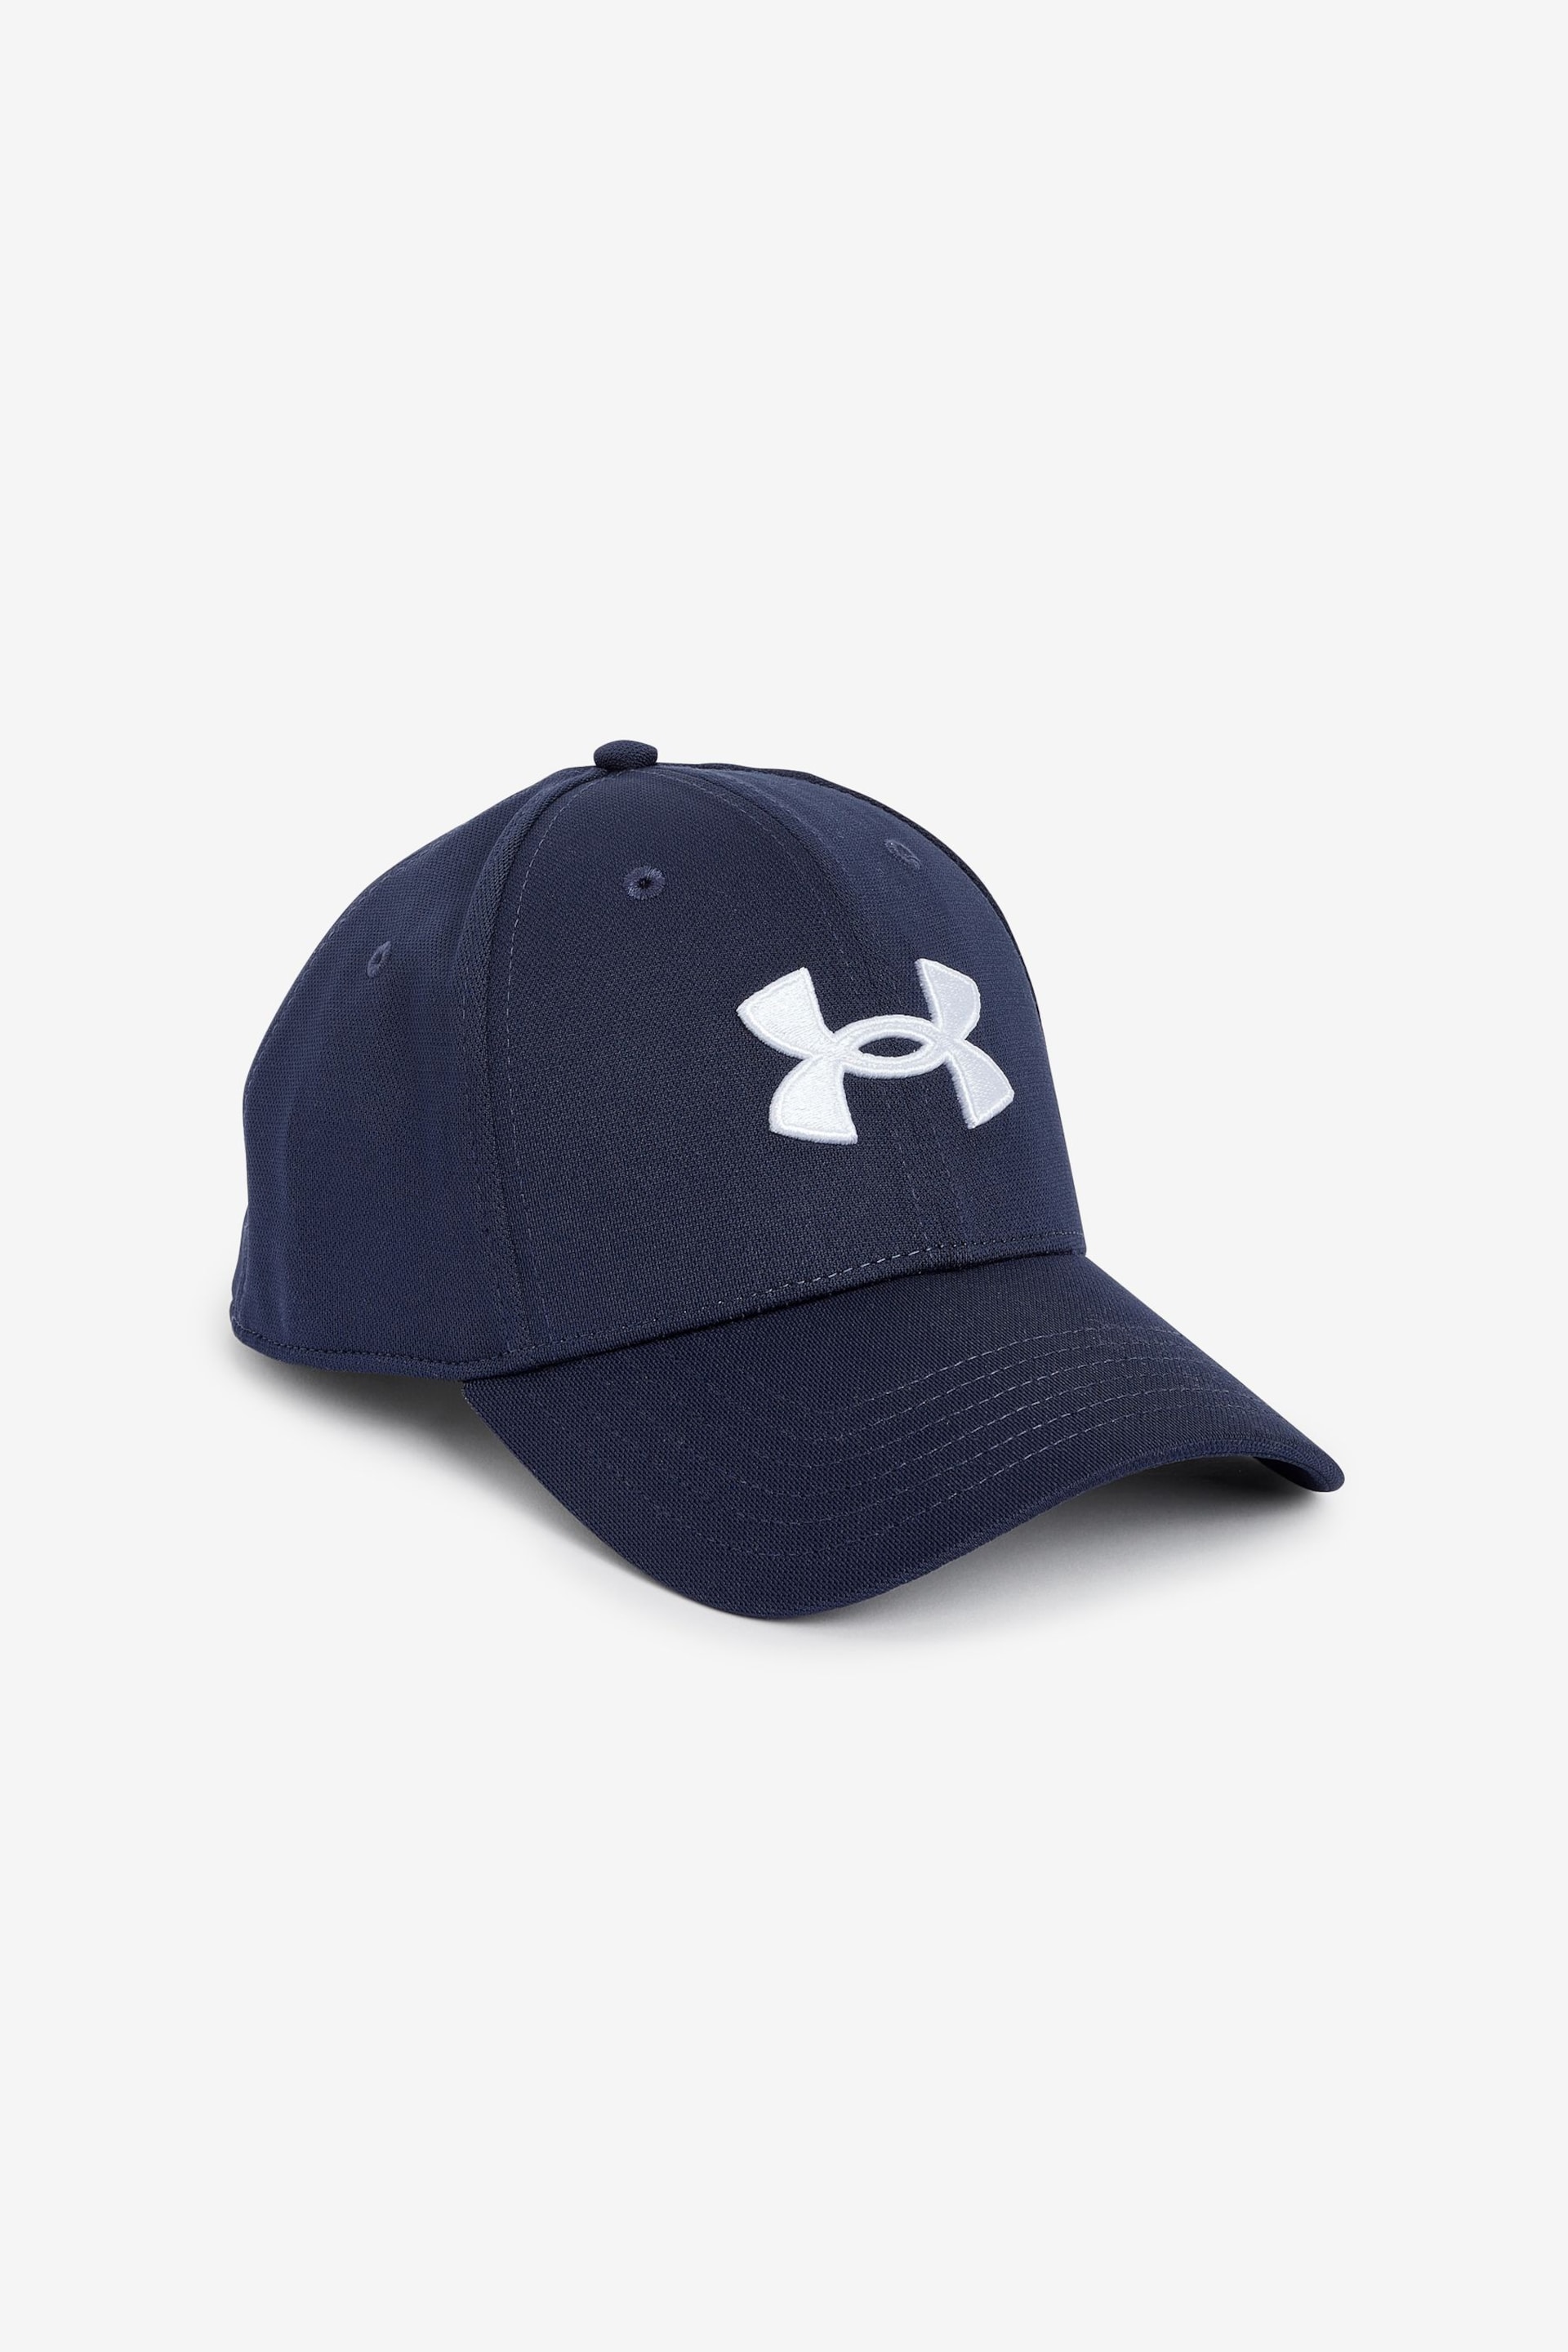 Under Armour Blue Blitzing Cap - Image 3 of 4